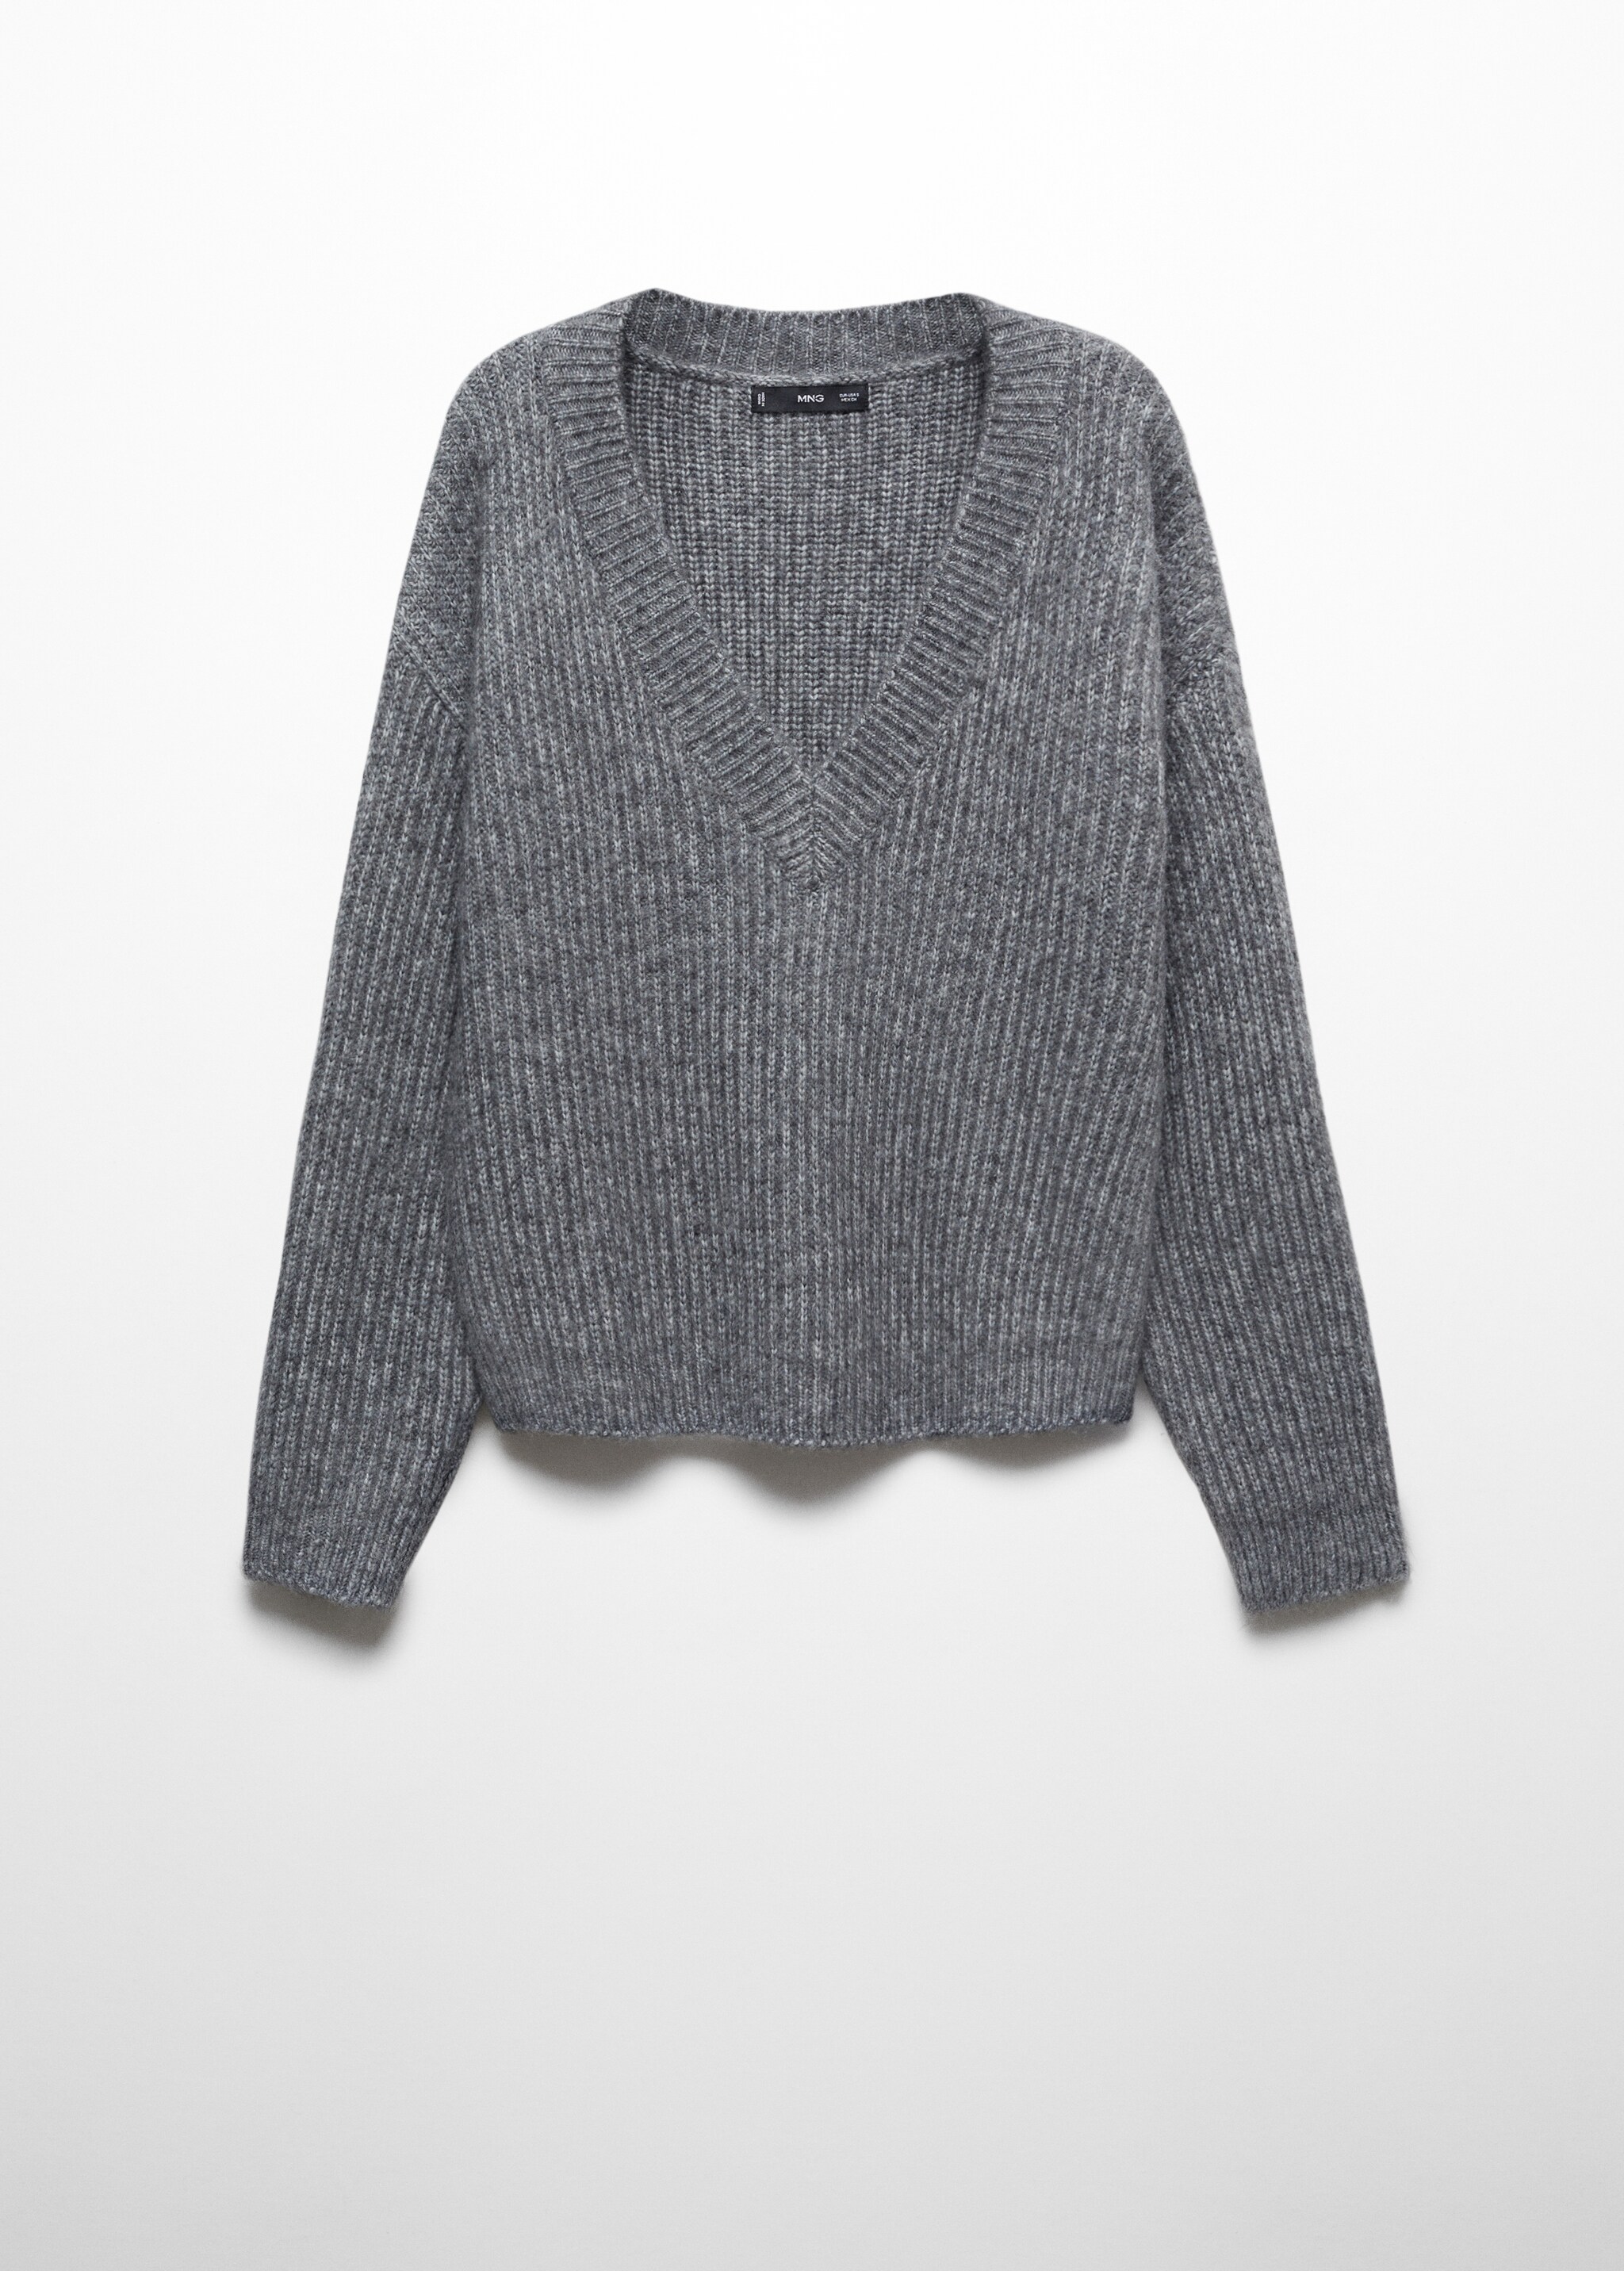 V-neck knit sweater - Article without model